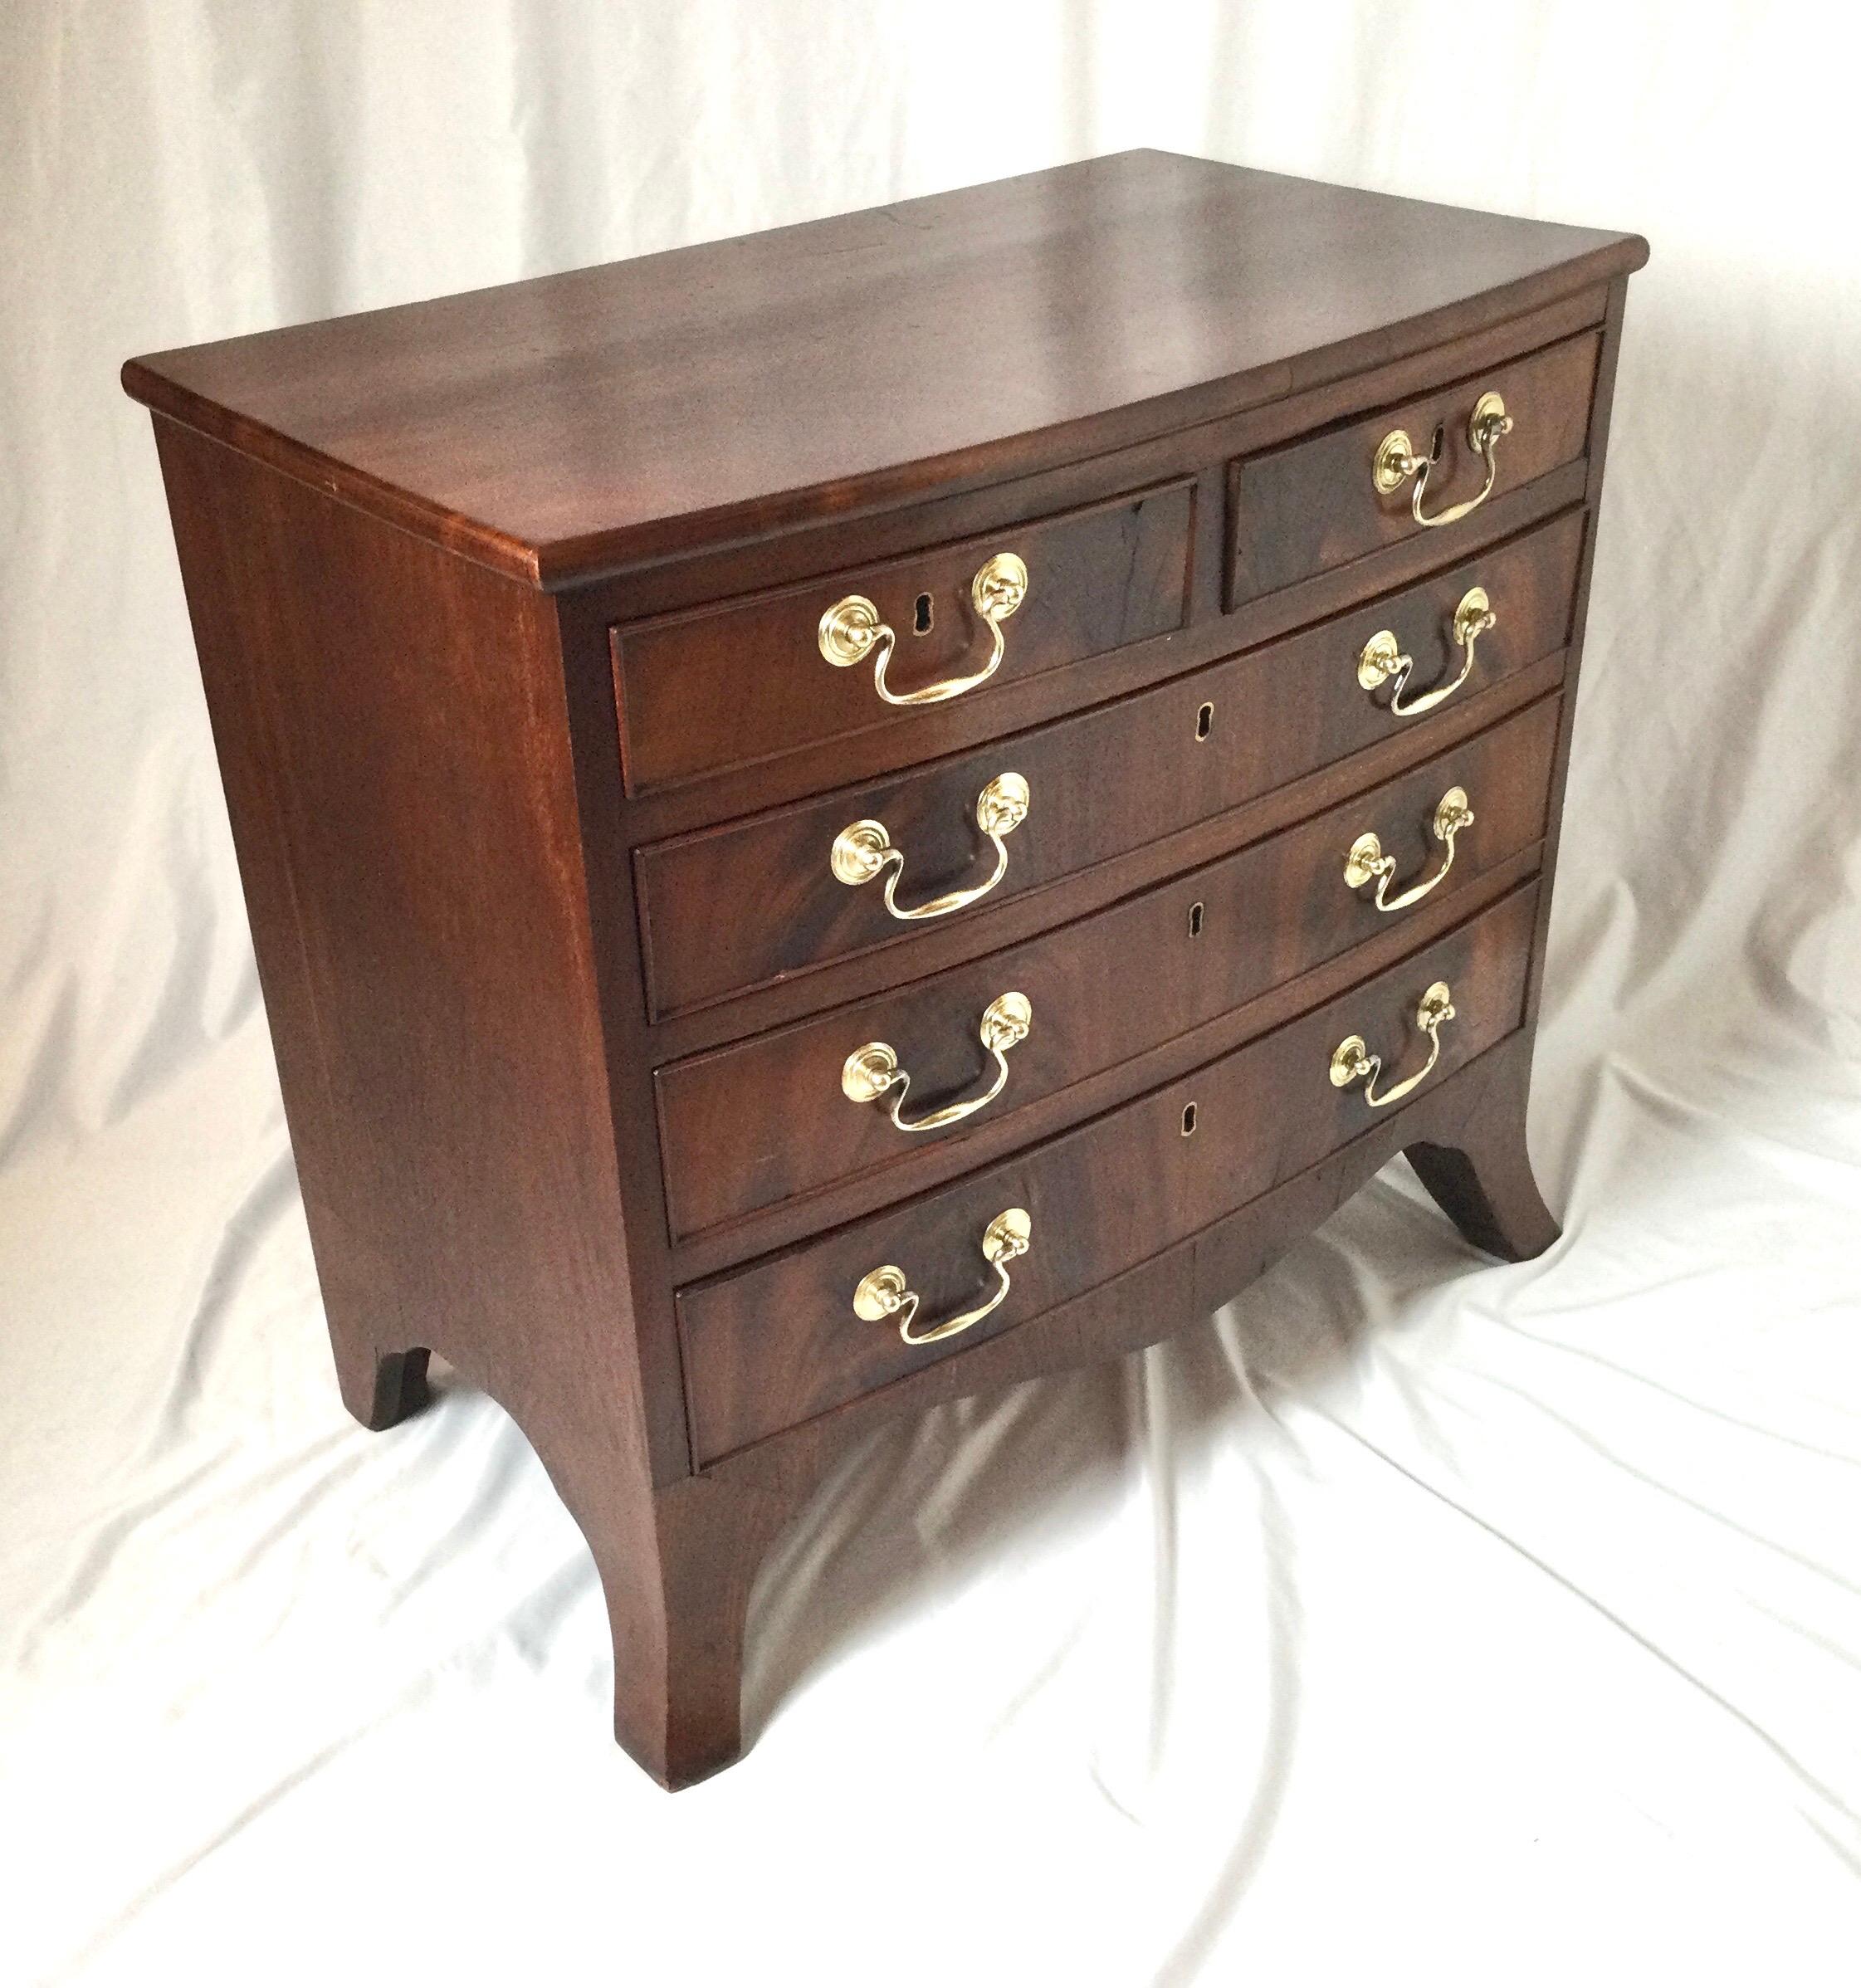 Late 19th Century Diminutive Antique English Chest of Drawers Circa 1875